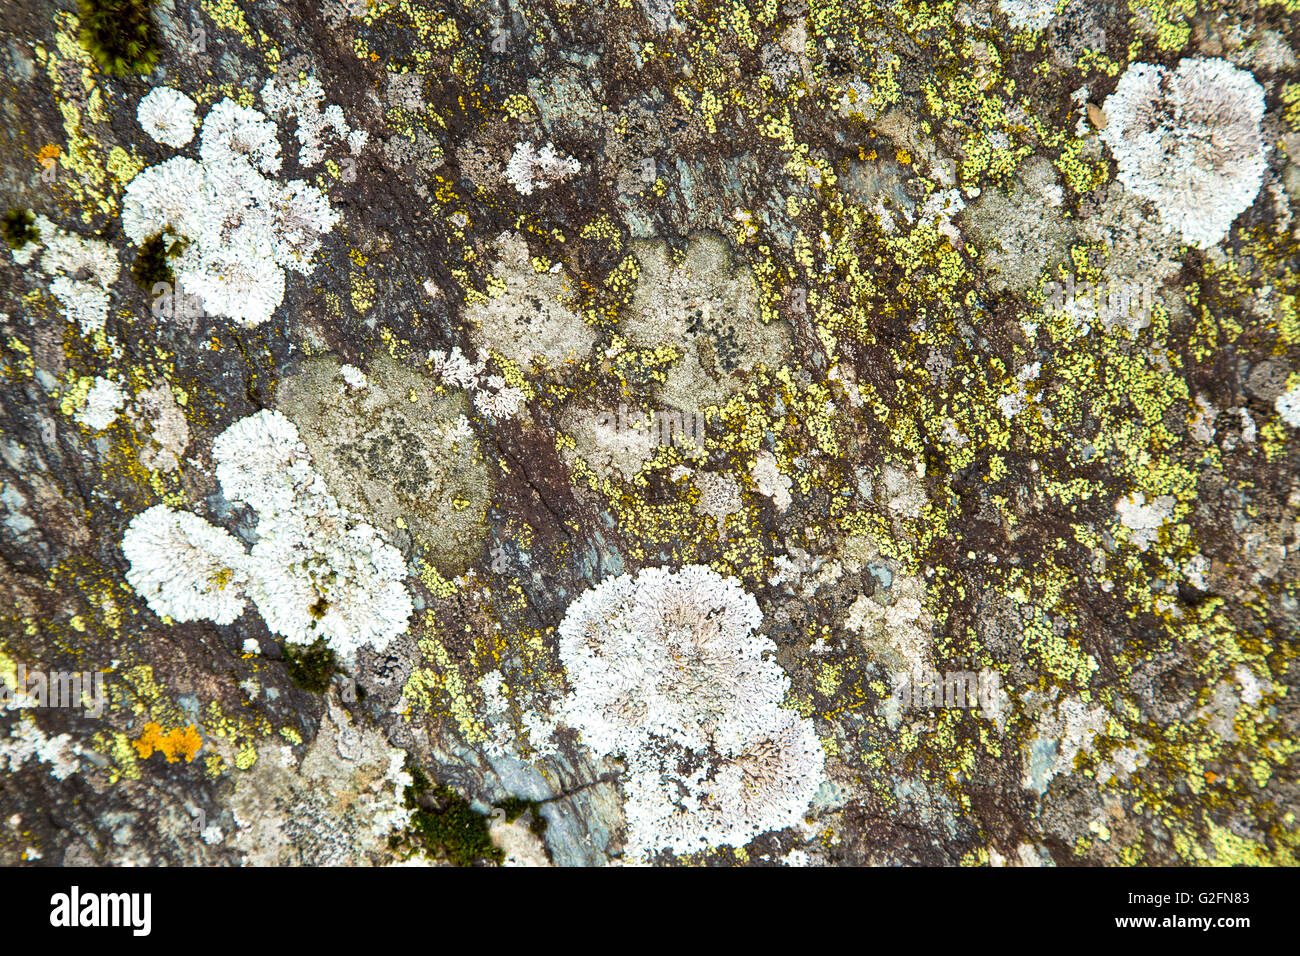 A stone surface colored by lichens Stock Photo